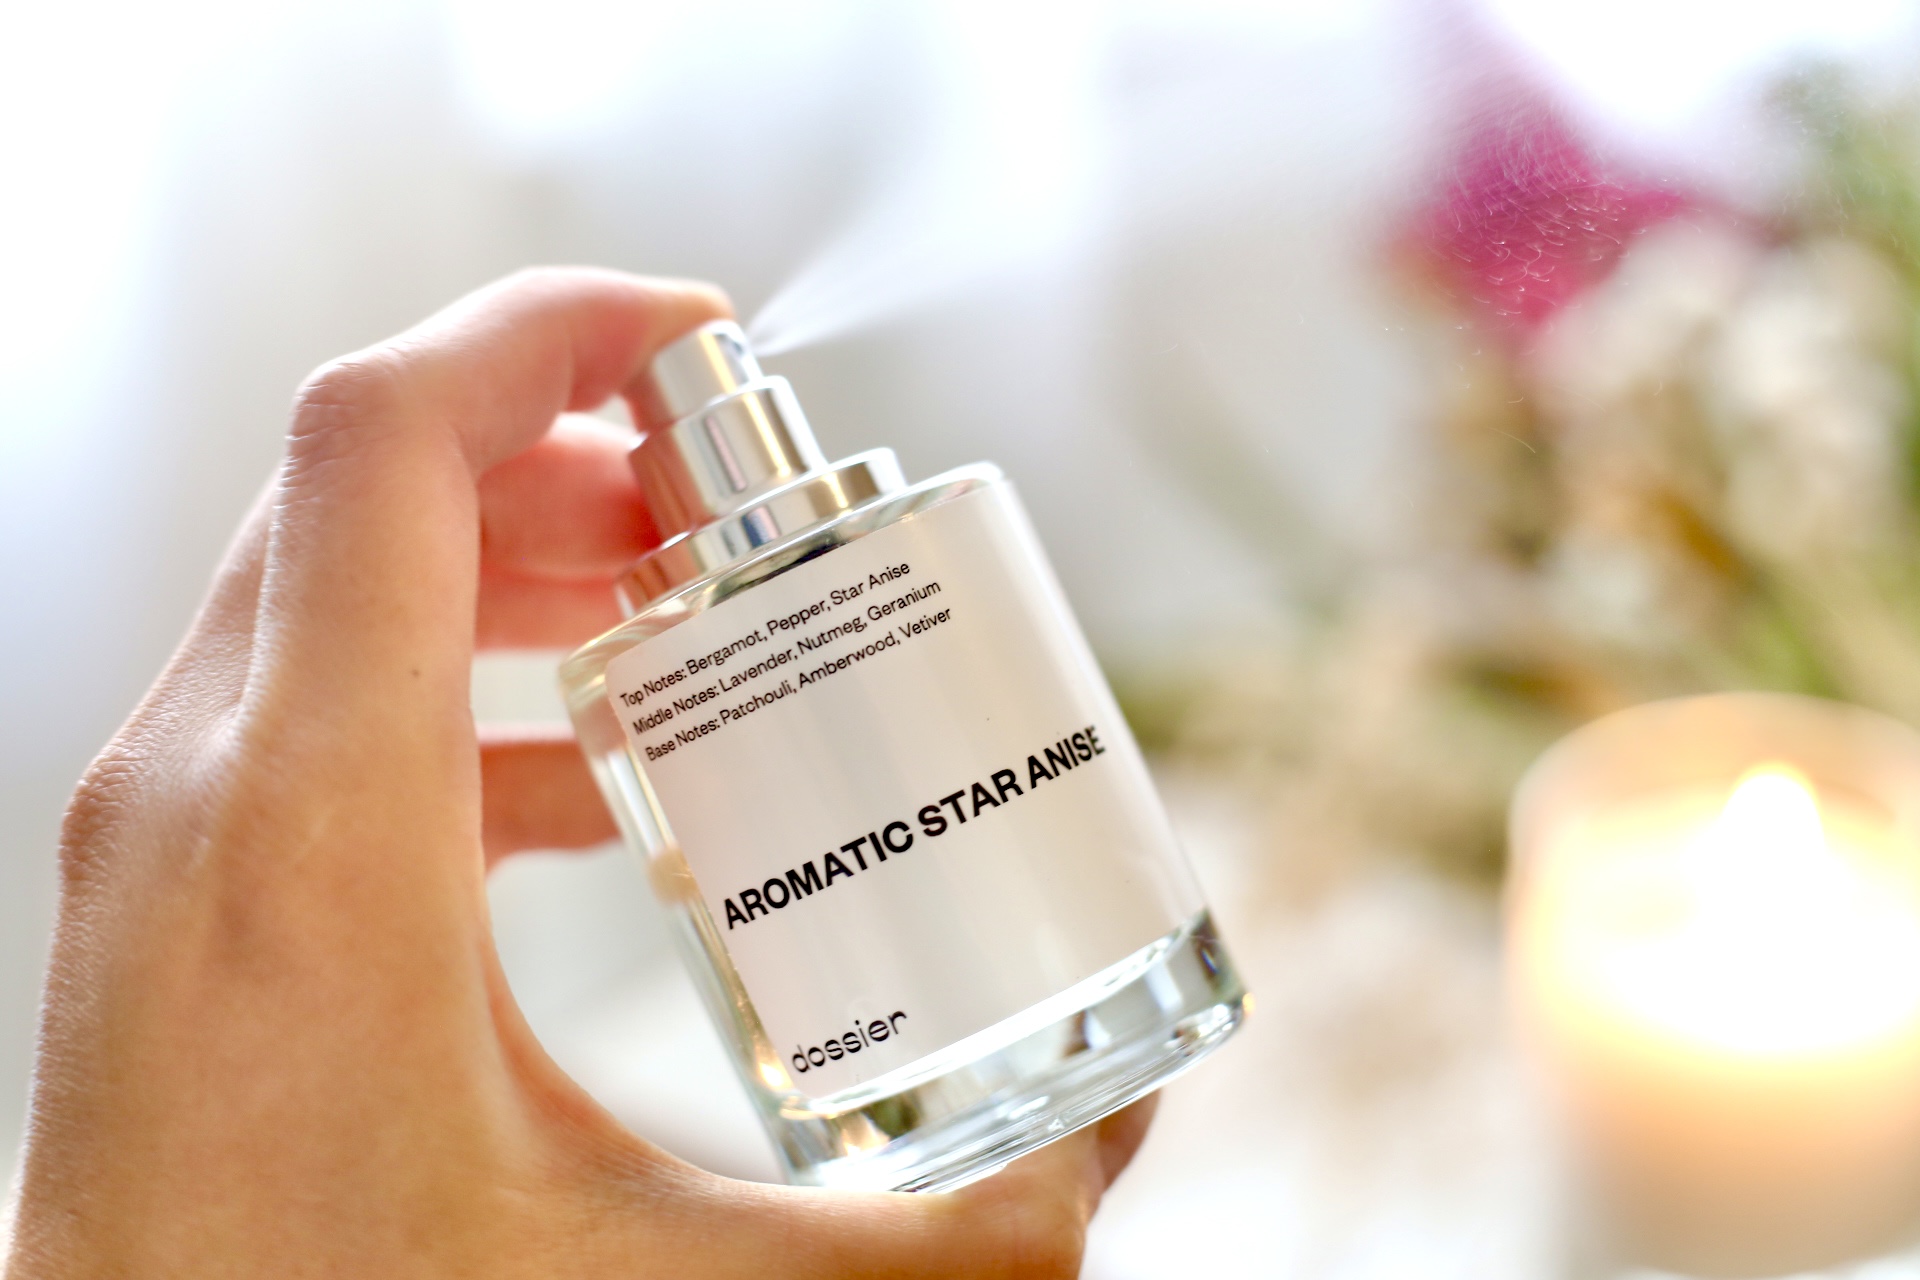 Dior Sauvage Dupe Perfume: Aromatic Star Anise - Dossier Perfumes